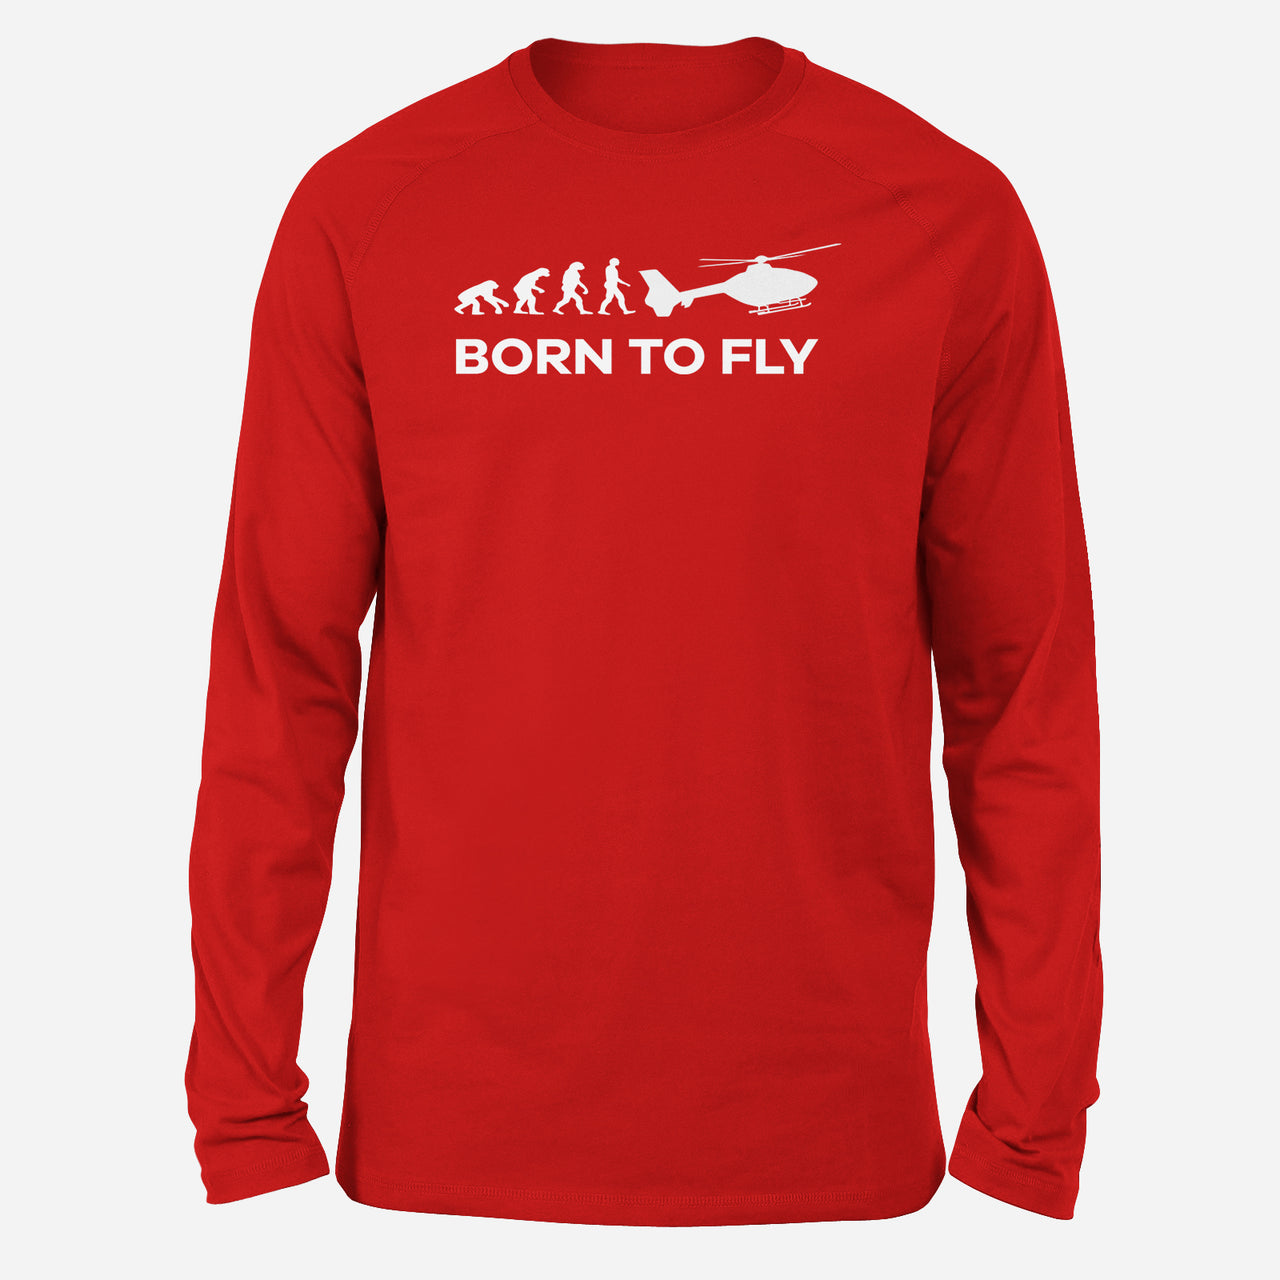 Born To Fly Helicopter Designed Long-Sleeve T-Shirts